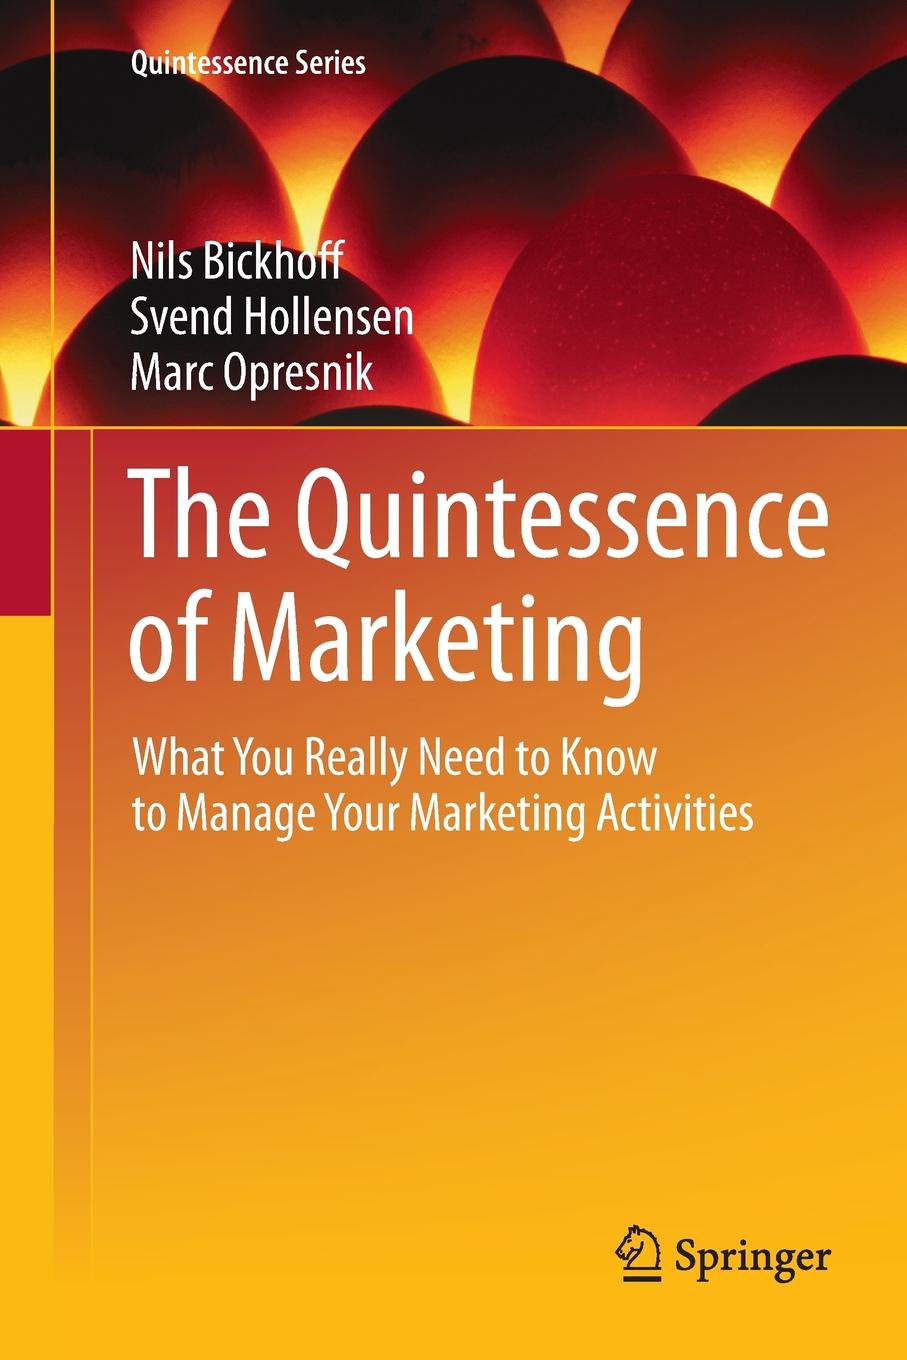 The Quintessence of Marketing. What You Really Need to Know to Manage Your Marketing Activities